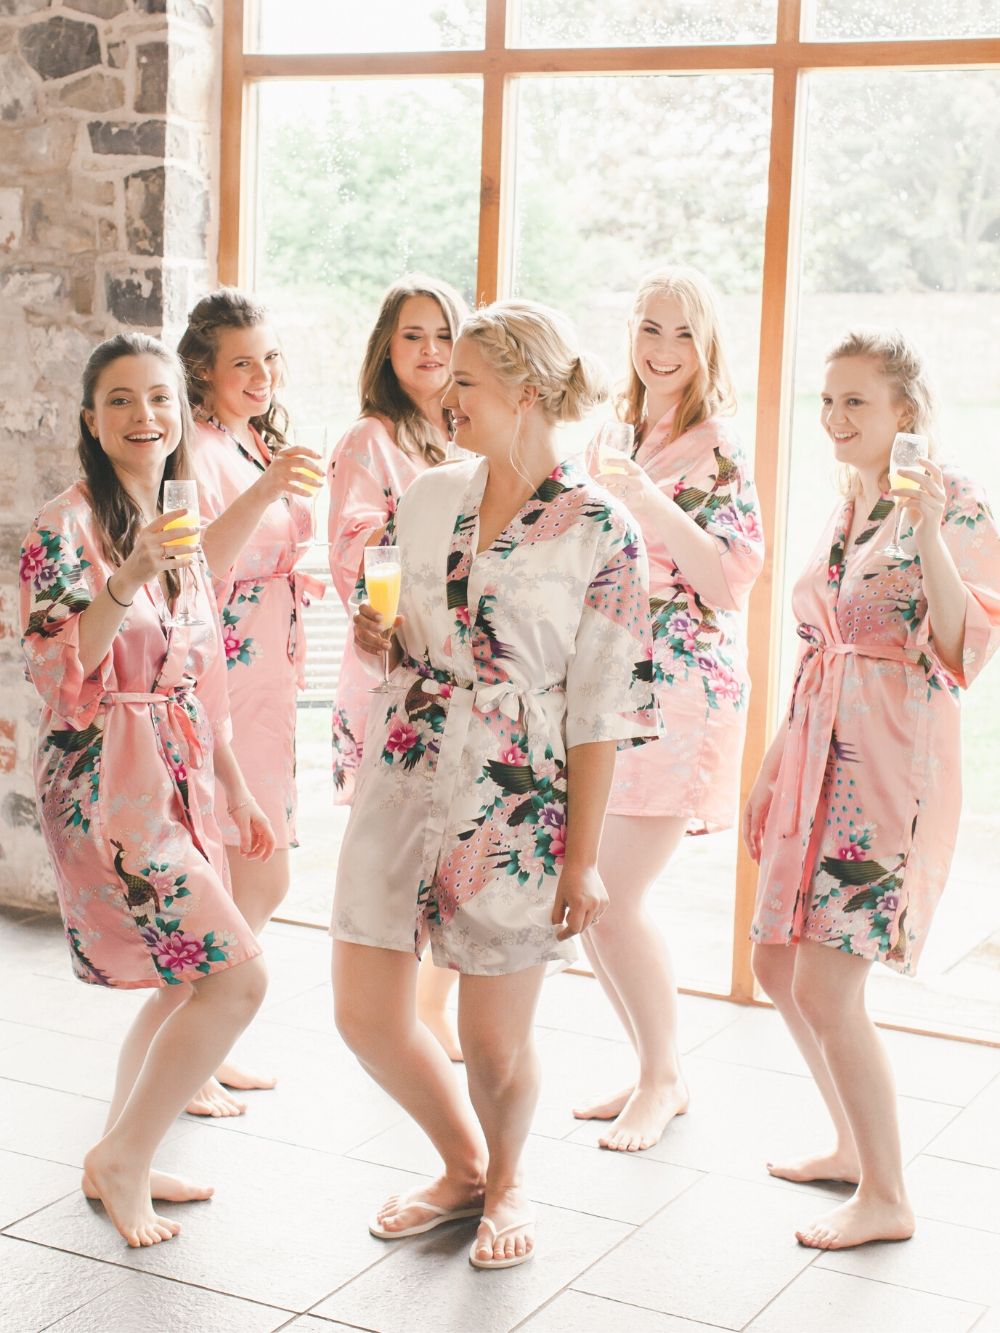 Bride and her bridesmaids getting ready on the wedding day in their pink silk kimonos